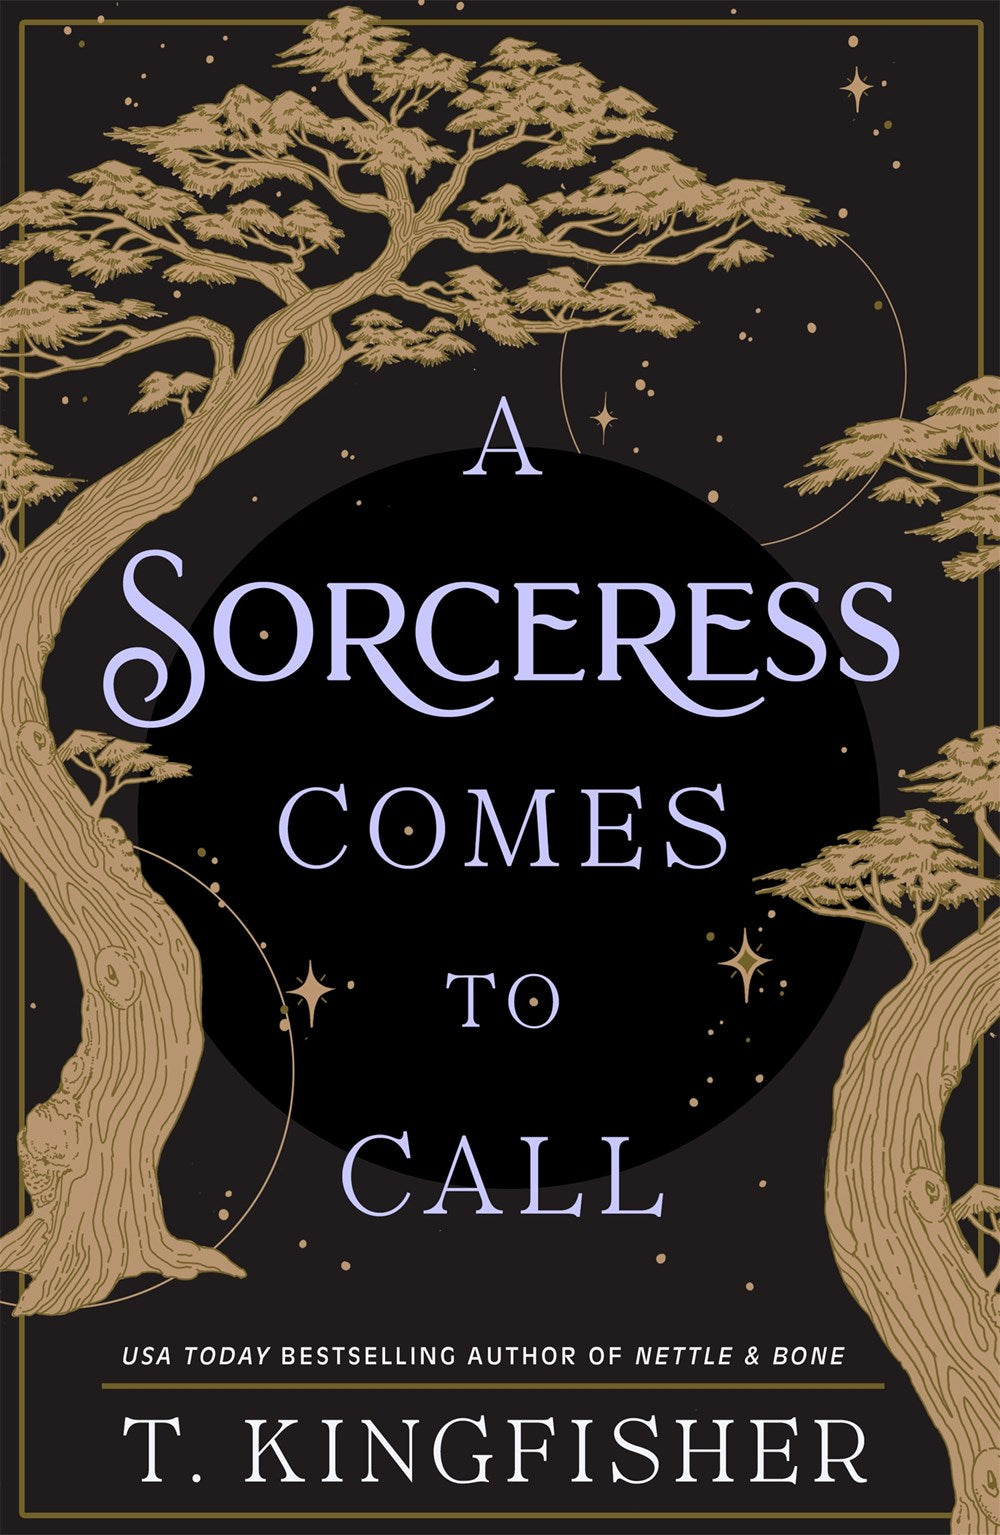 A Sorceress Comes to Call - T. Kingfisher